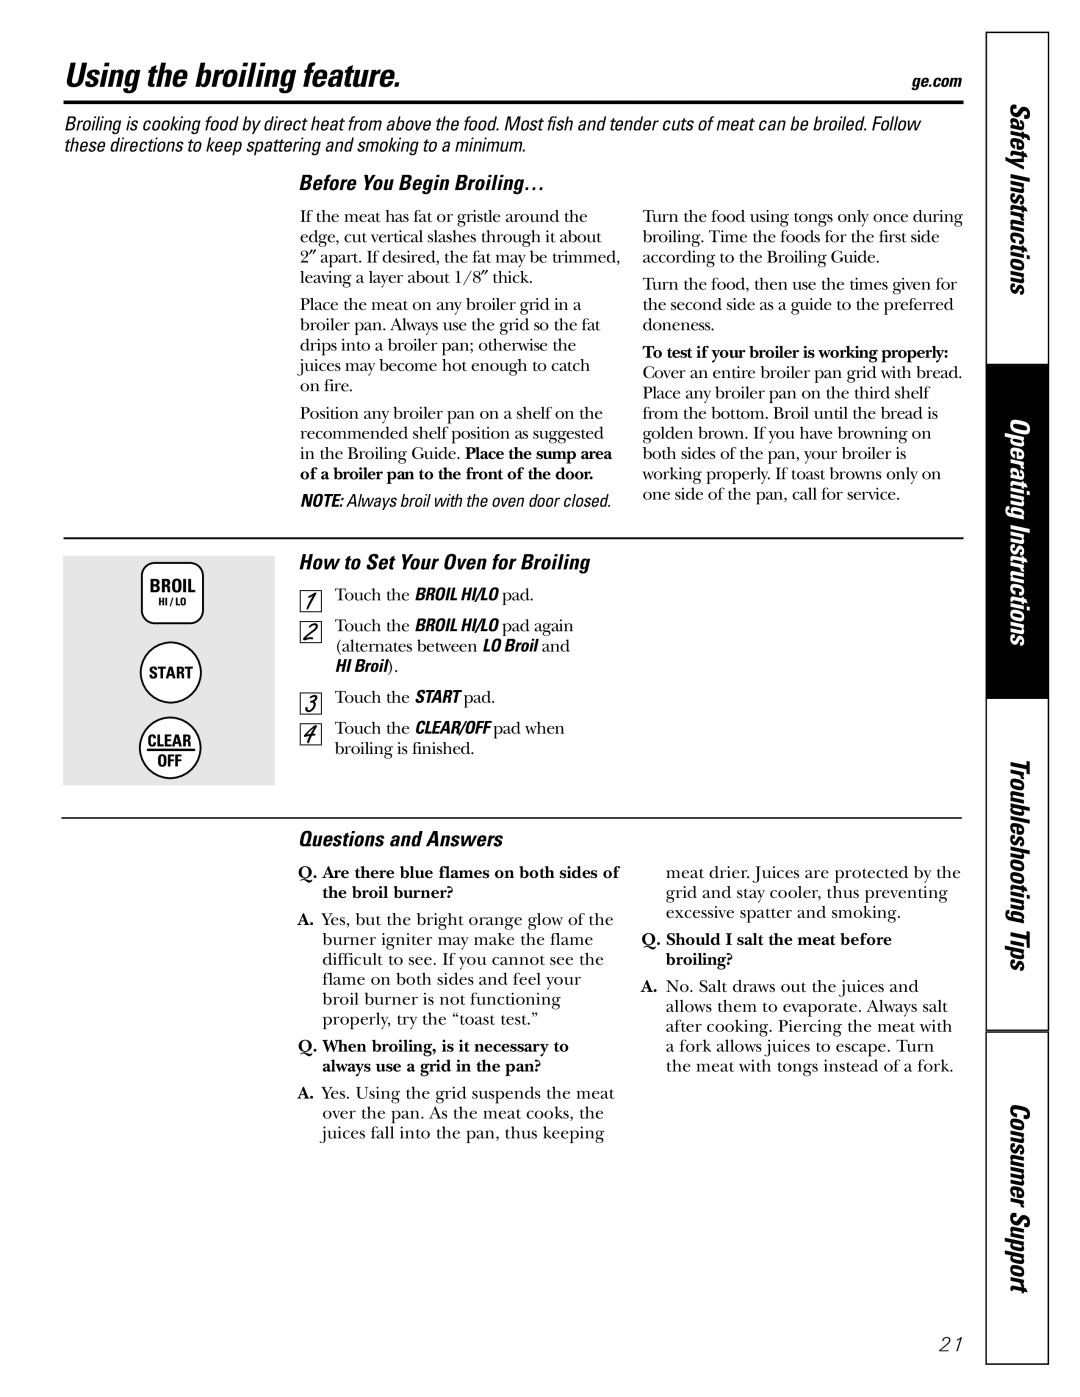 GE JGRP20 Using the broiling feature, Before You Begin Broiling…, How to Set Your Oven for Broiling, Safety, Instructions 